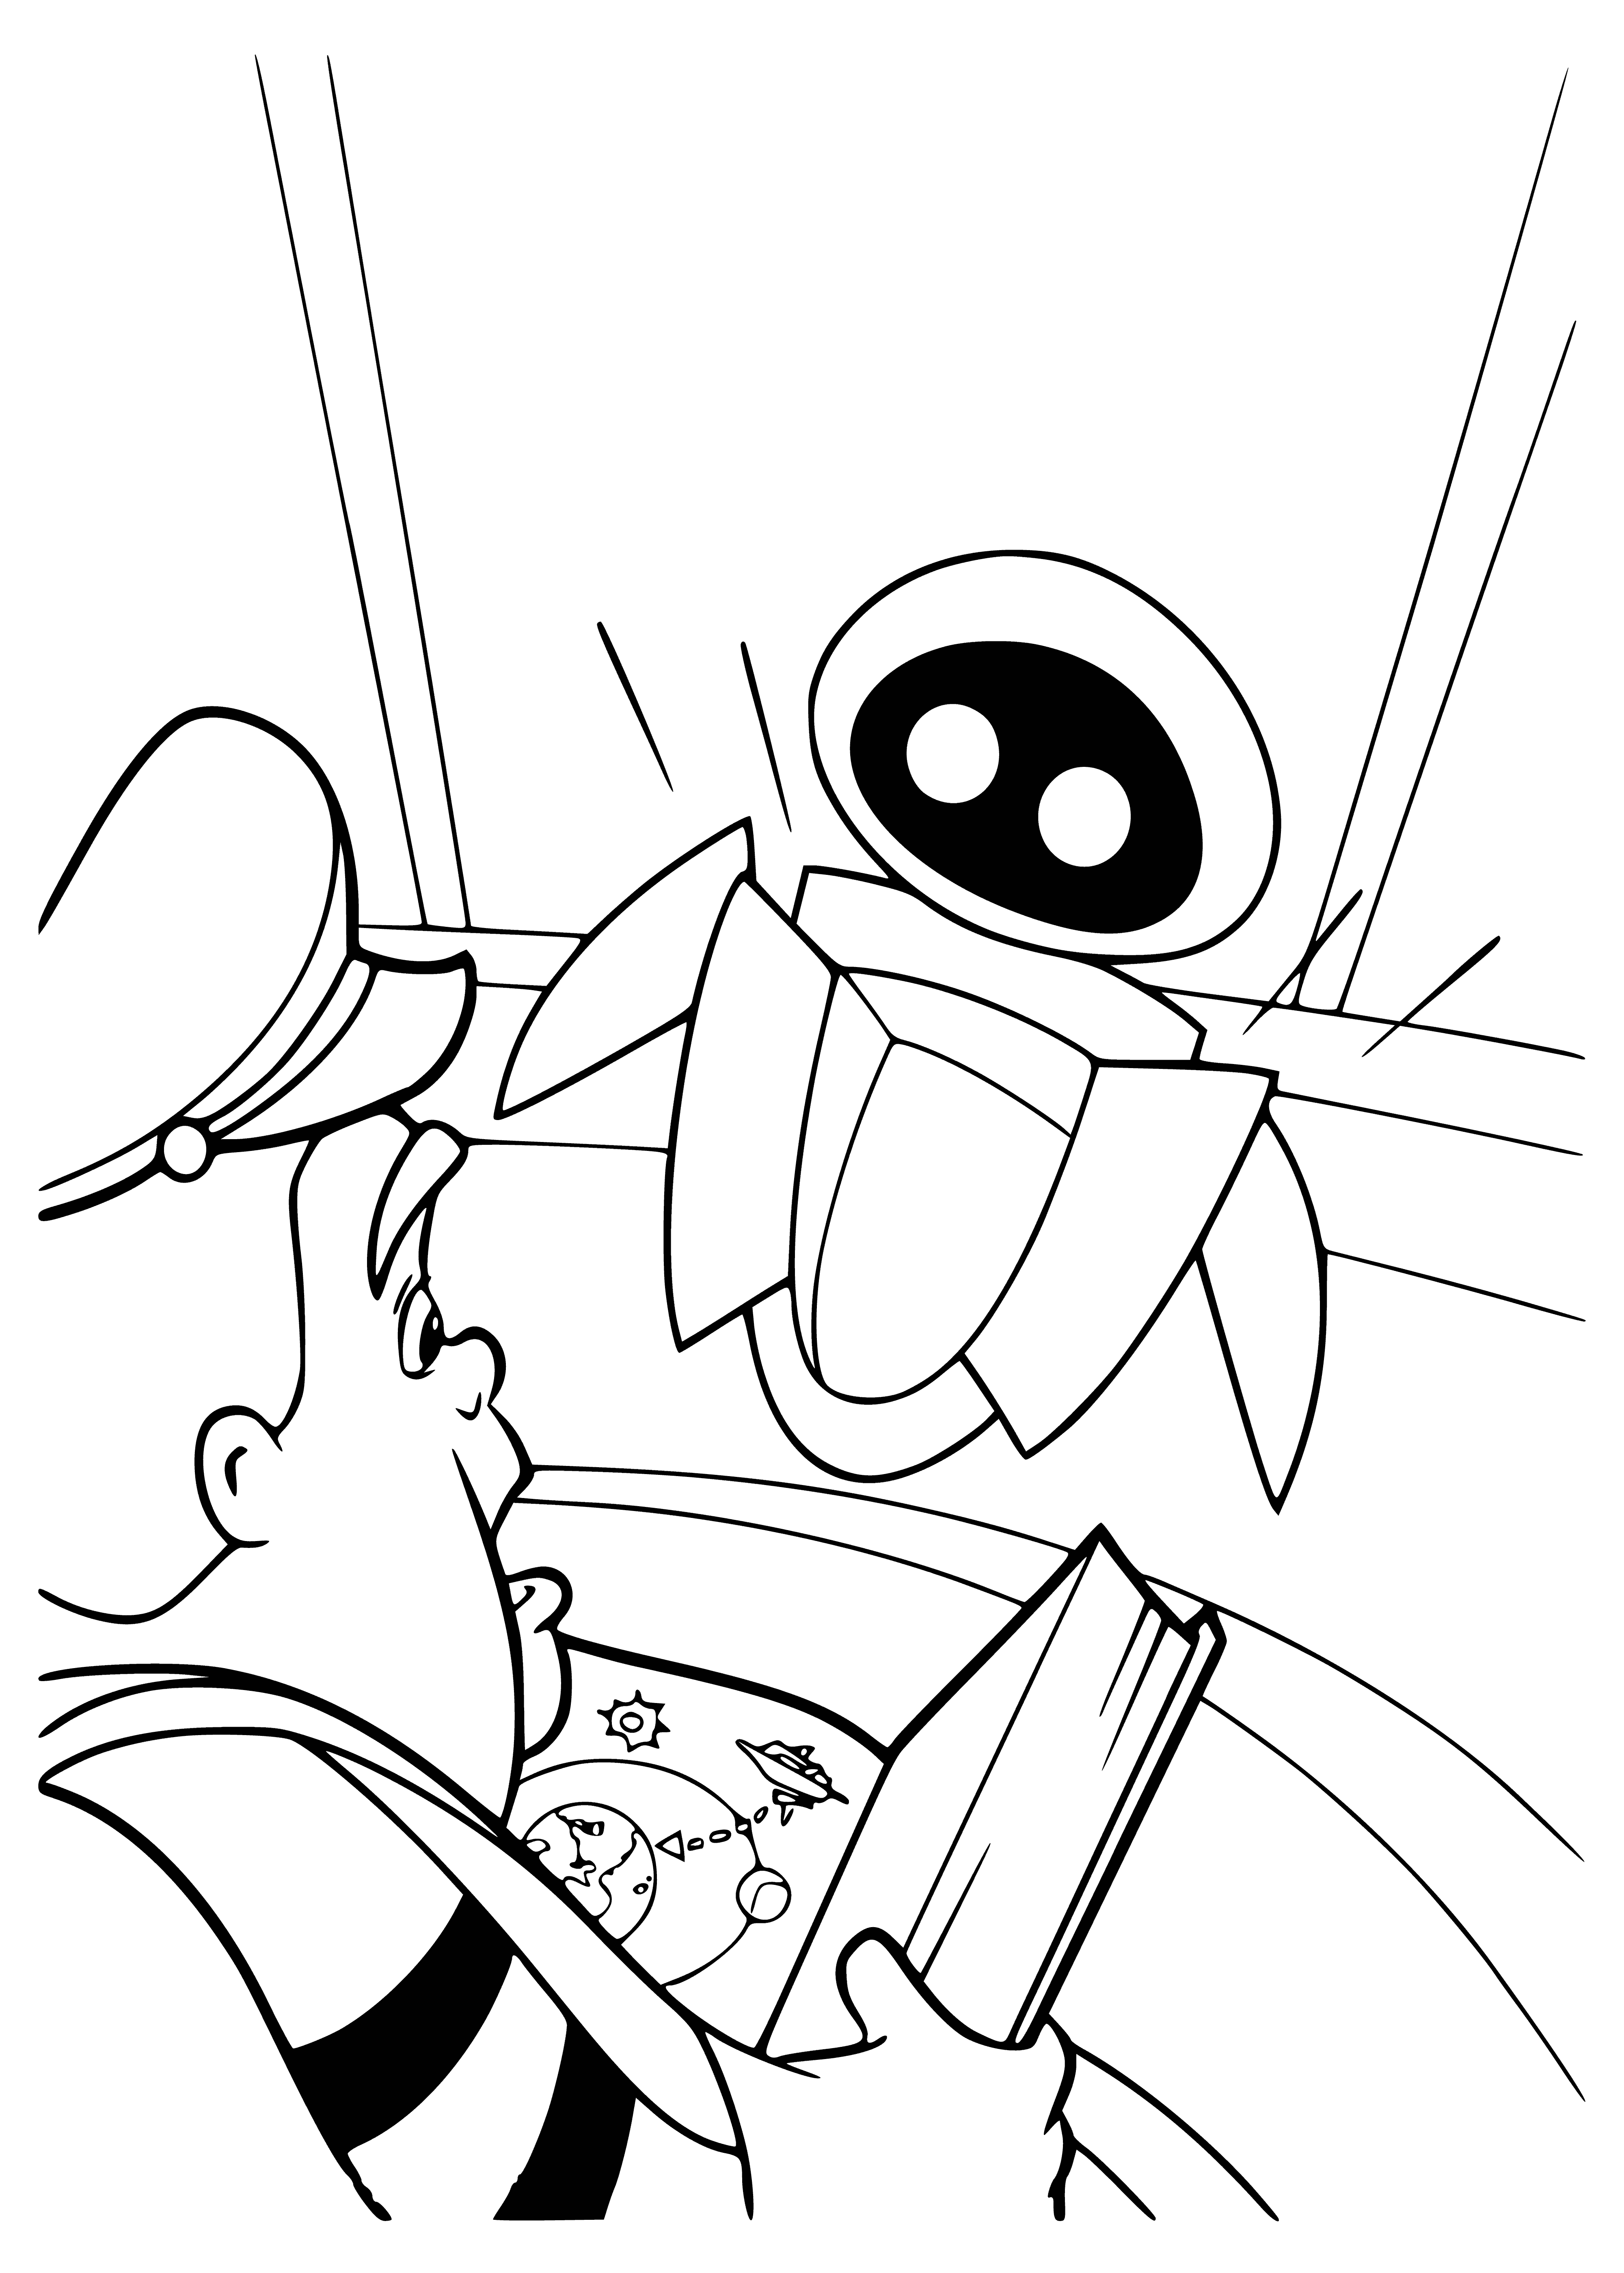 coloring page: Two robots, one small and round, the other larger and white, stand against a starscape, the small one reaching out to touch the other's hand. #Robots #Friendship